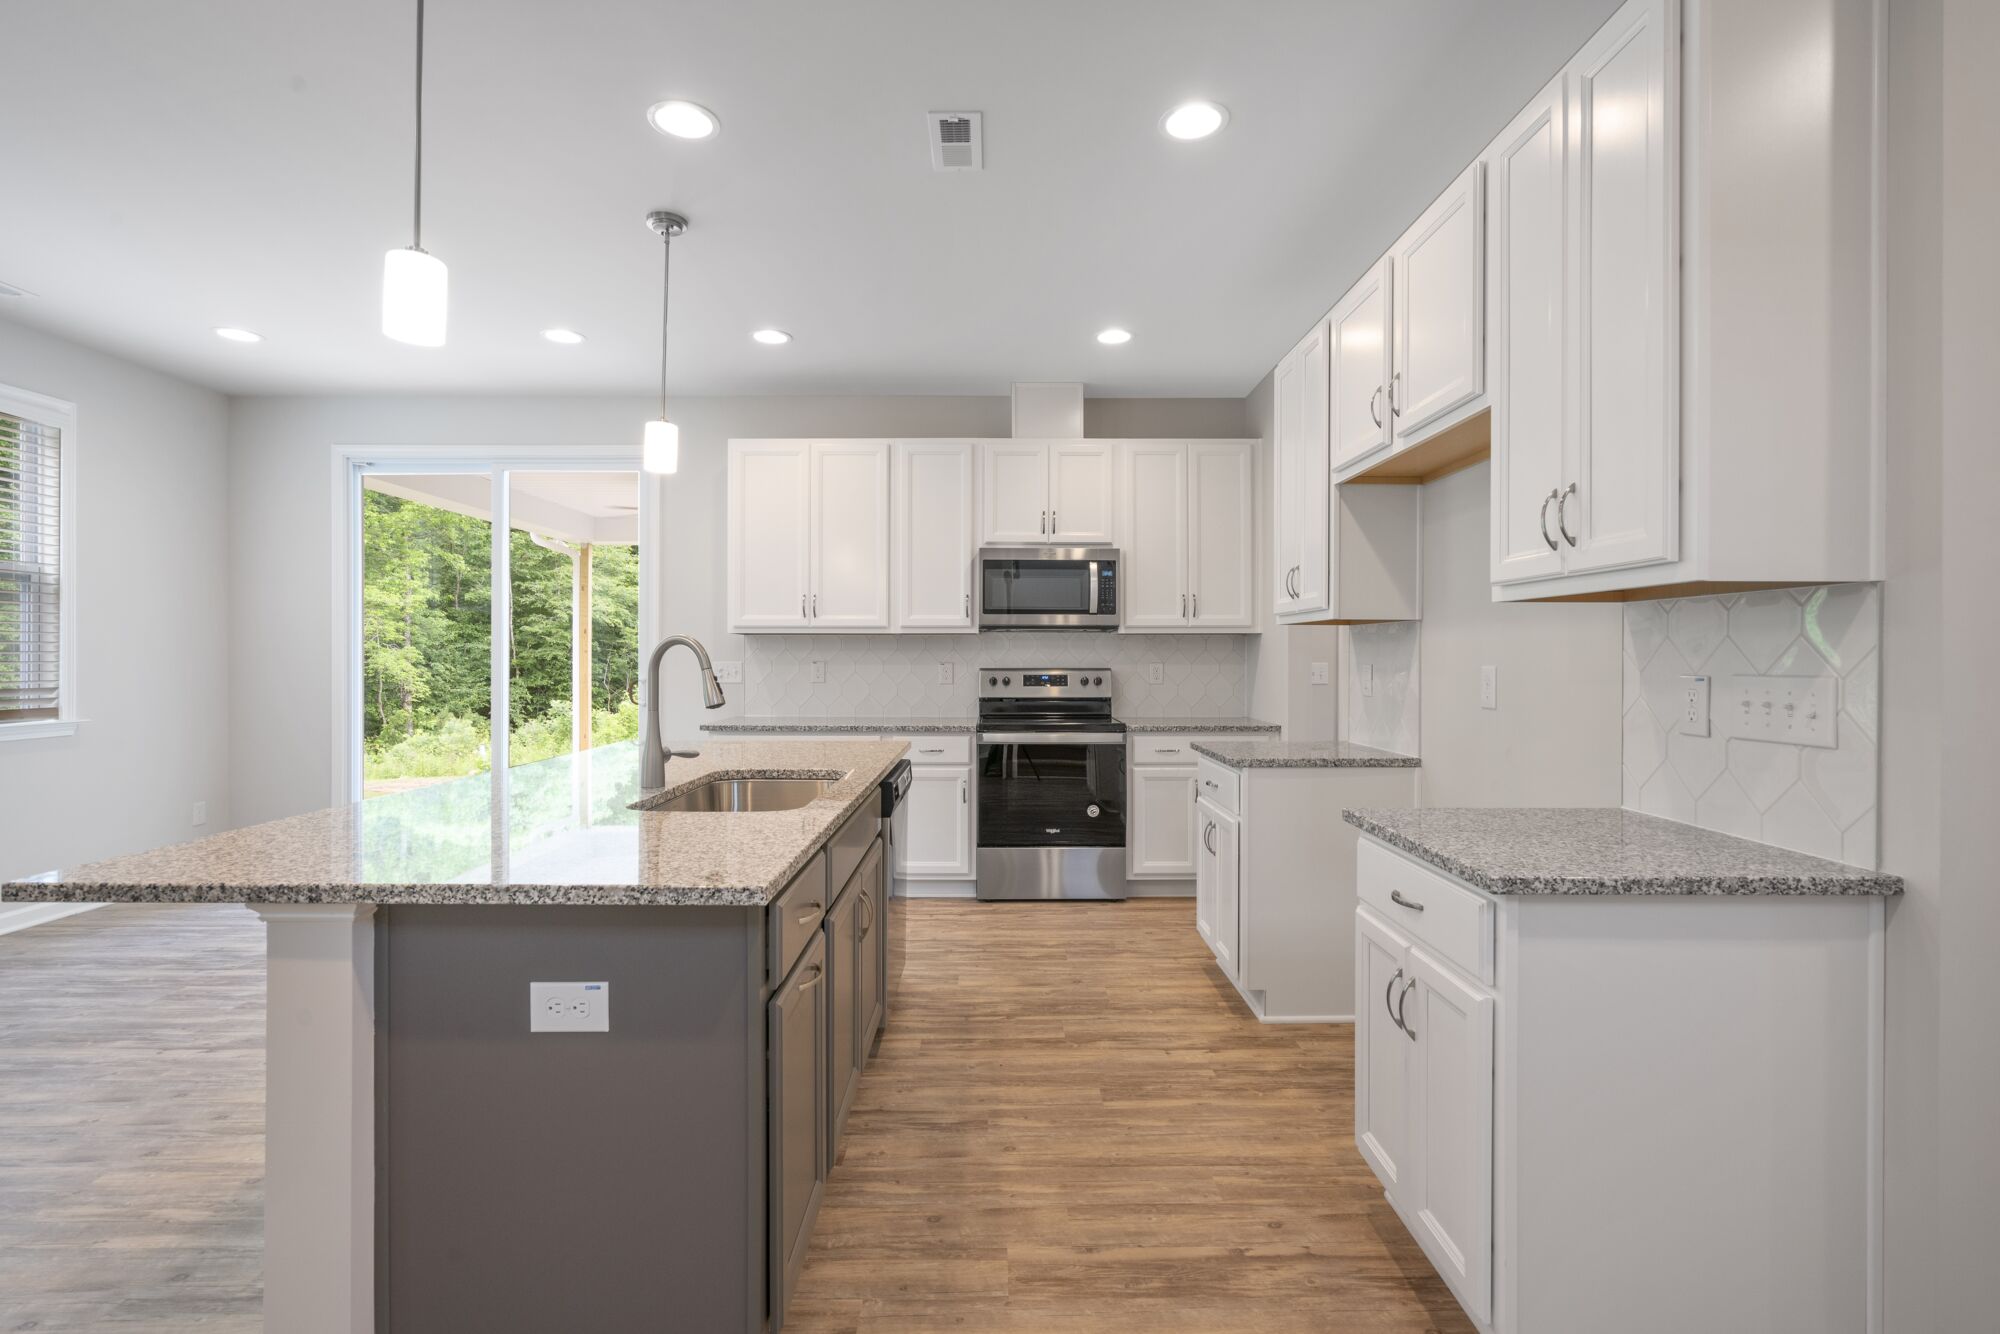 L-Shaped Kitchen with door, pendant light, white cabinets, window, wood flooring and dark wood cabinets